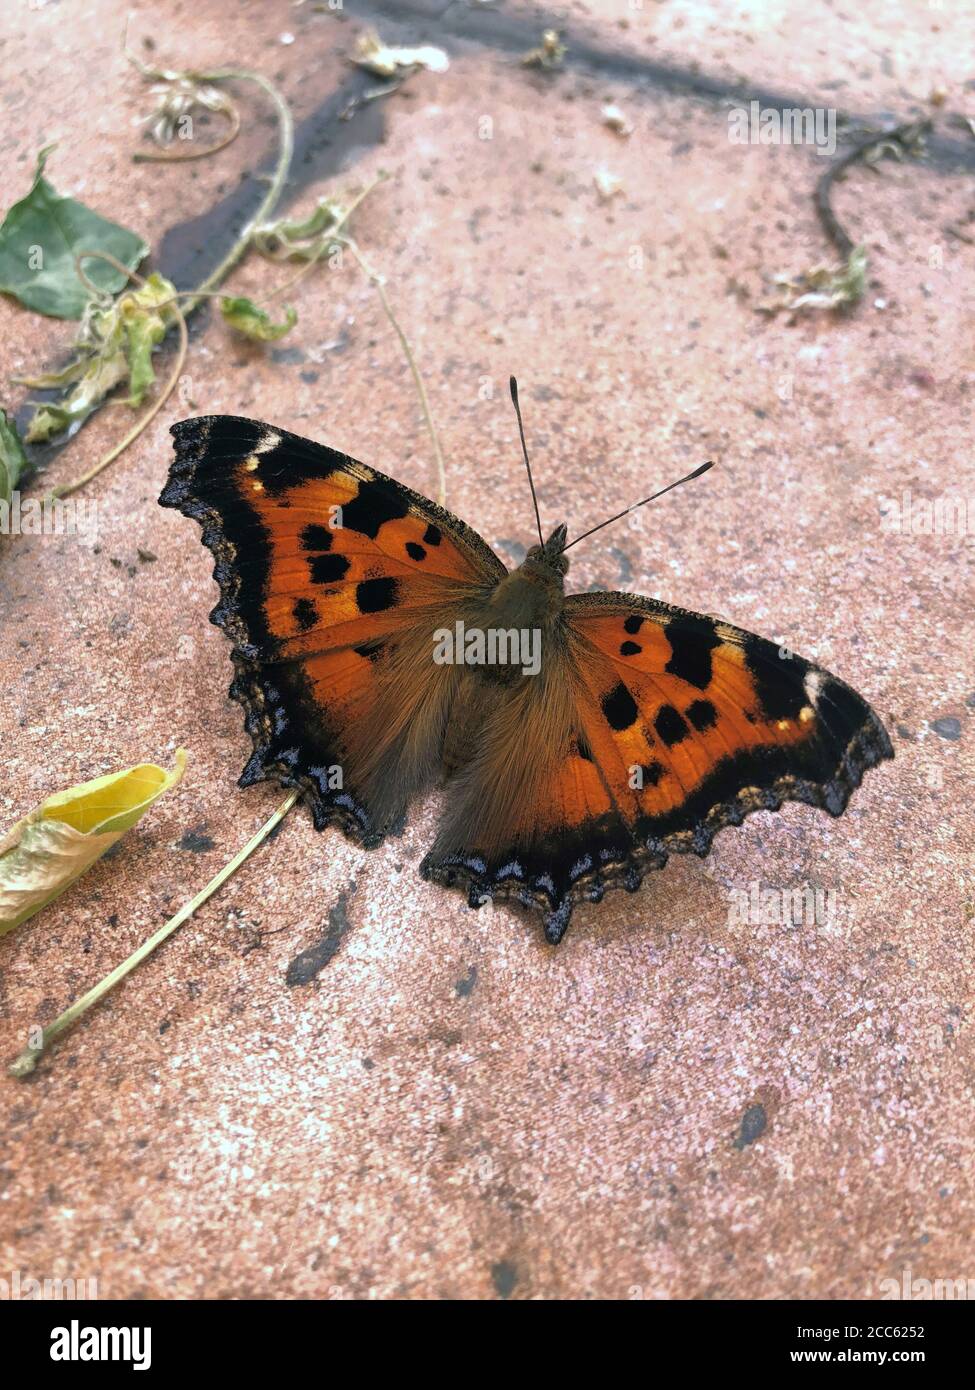 Small Tortoiseshell Butterfly sitting on the ground. Reddish orange insect with black markings on the forewings. Aglais urticae, mobile photo Stock Photo